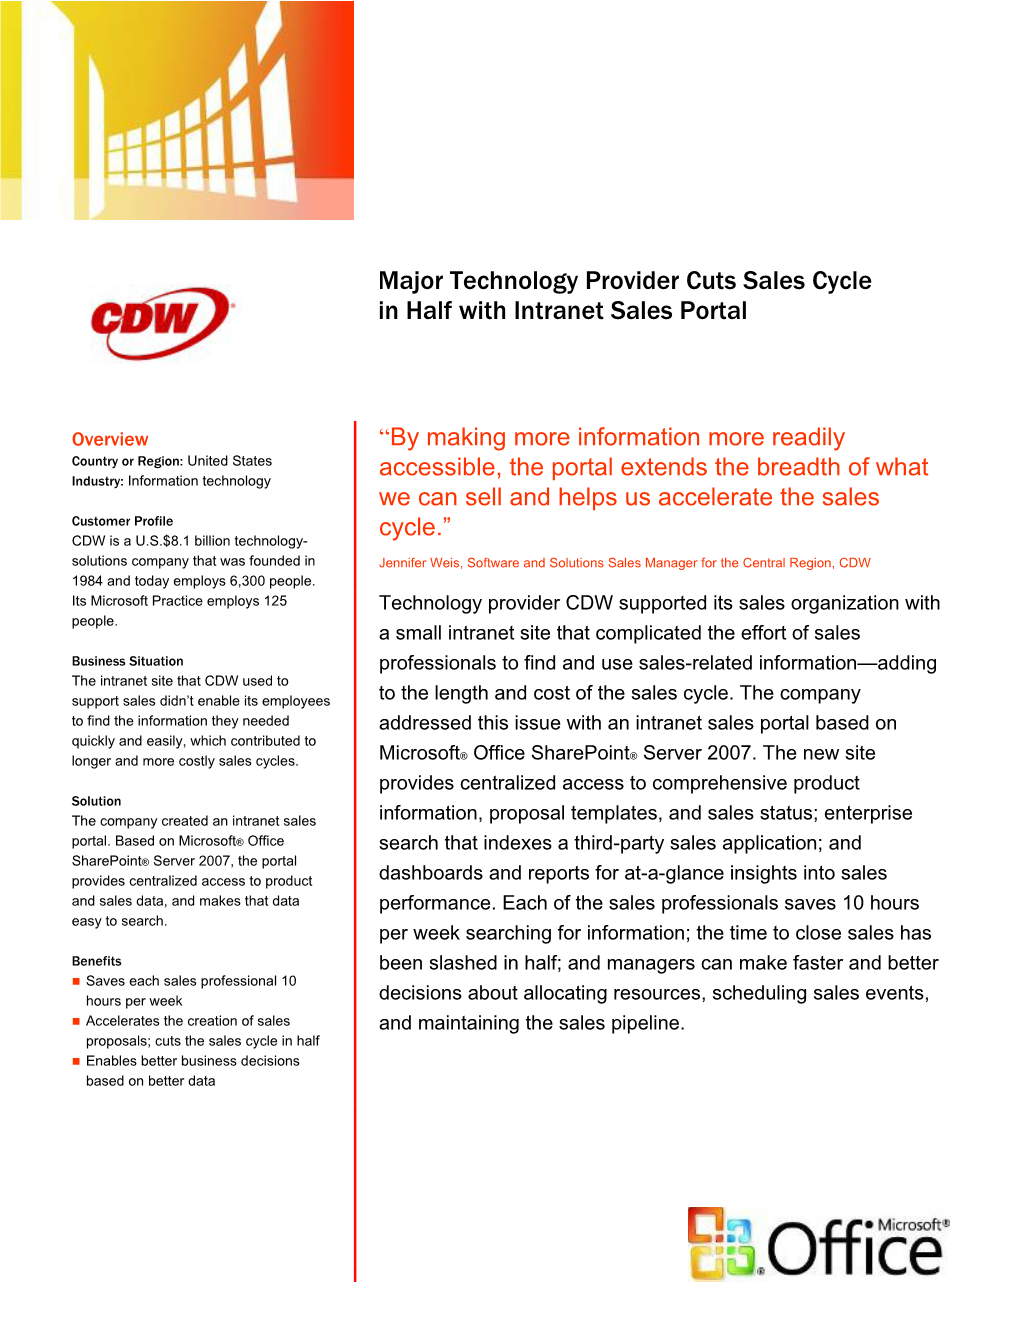 Major Technology Provider Cuts Sales Cycle in Half with Intranet Sales Portal